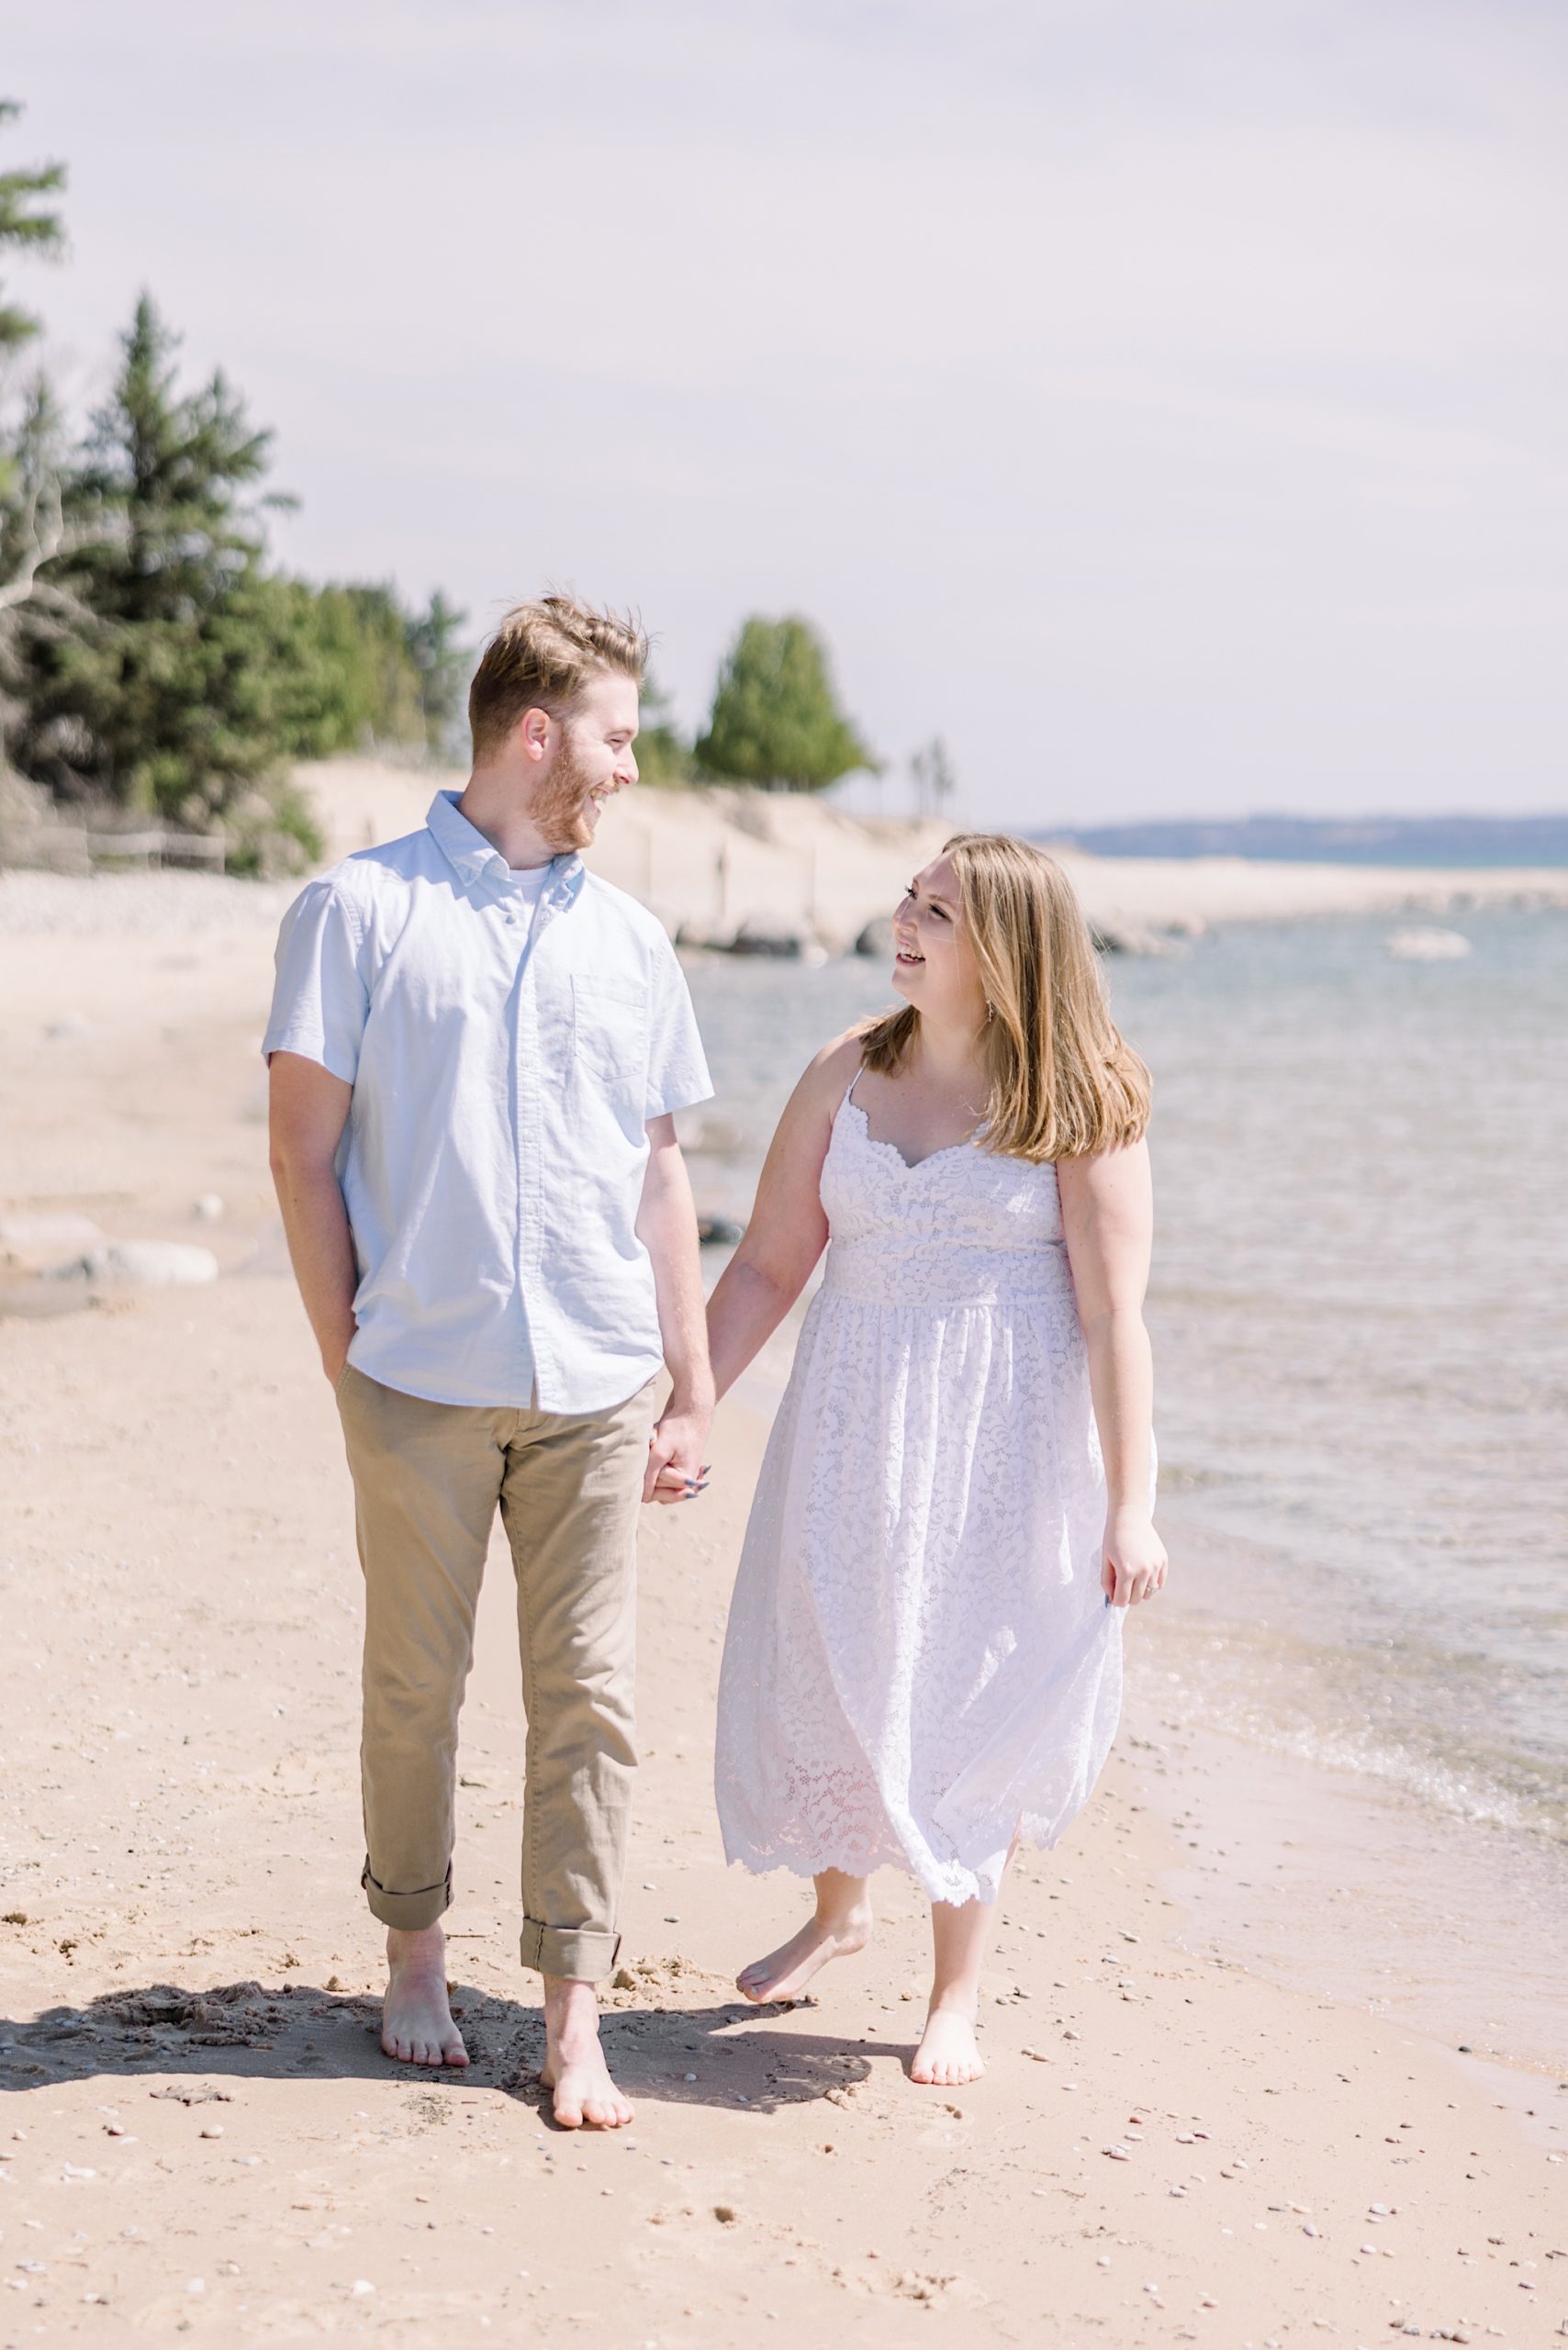 Bride and groom walk along beach together during Harbor Springs Engagement Session.